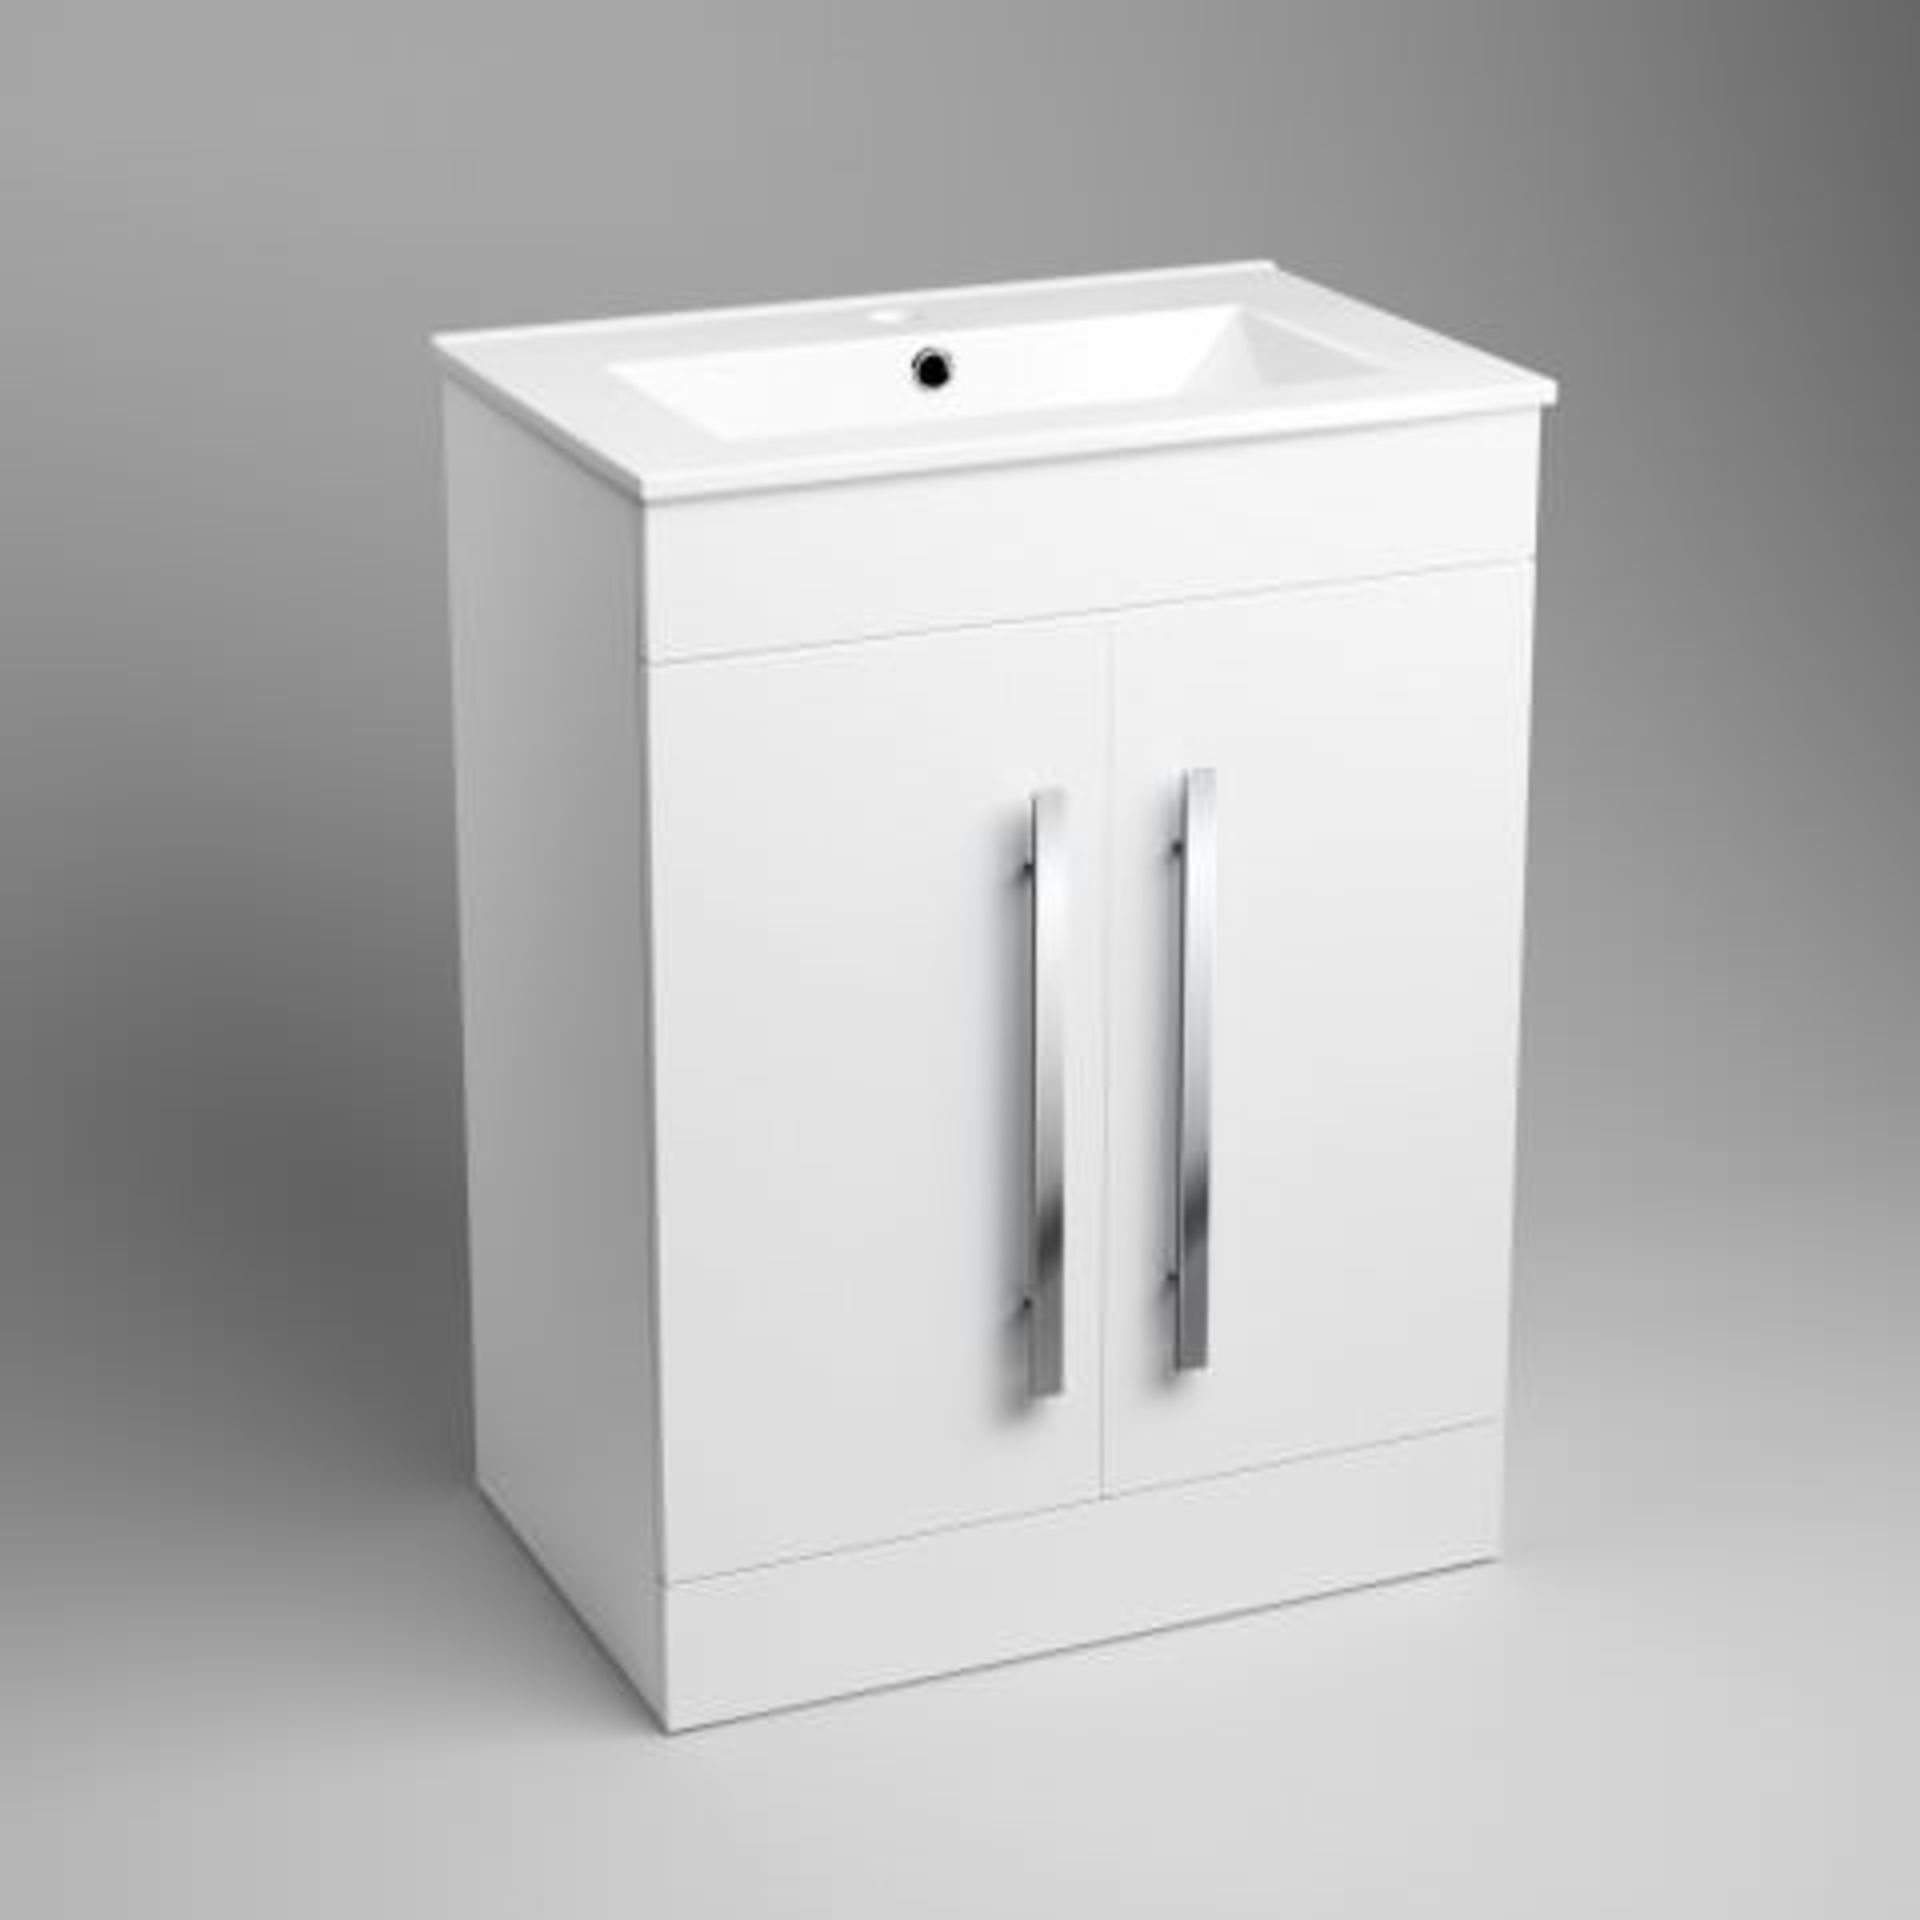 (I206) 600mm Avon High Gloss White Basin Cabinet - Floor Standing. RRP £499.99. COMES COMPLETE - Image 4 of 4